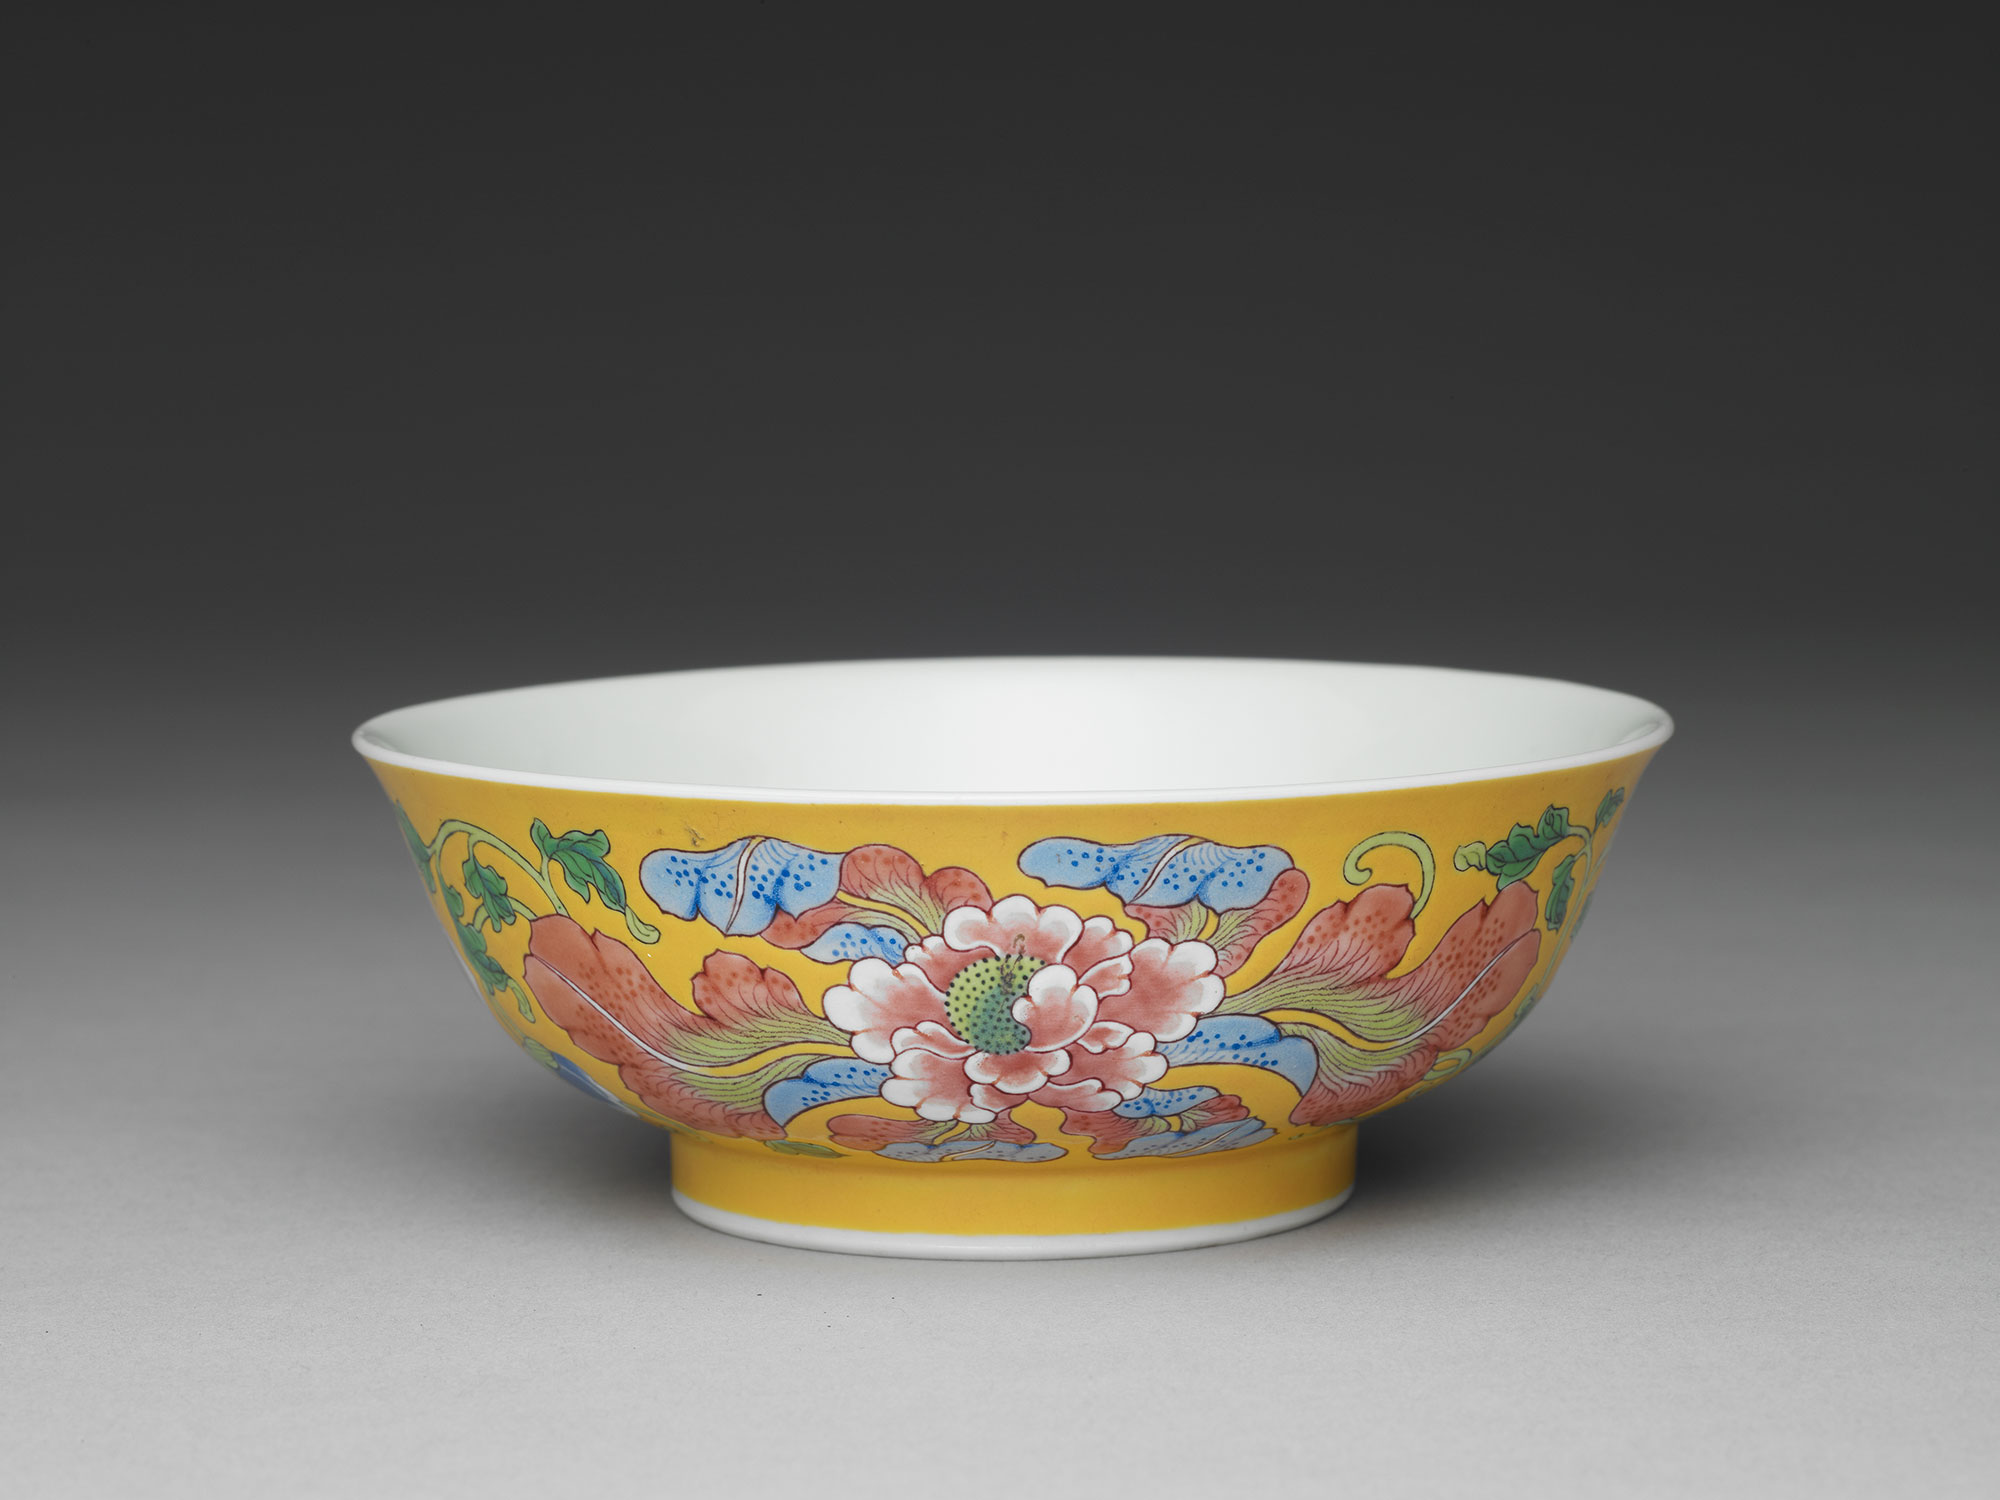 Bowl with peonies on a yellow ground in painted enamels